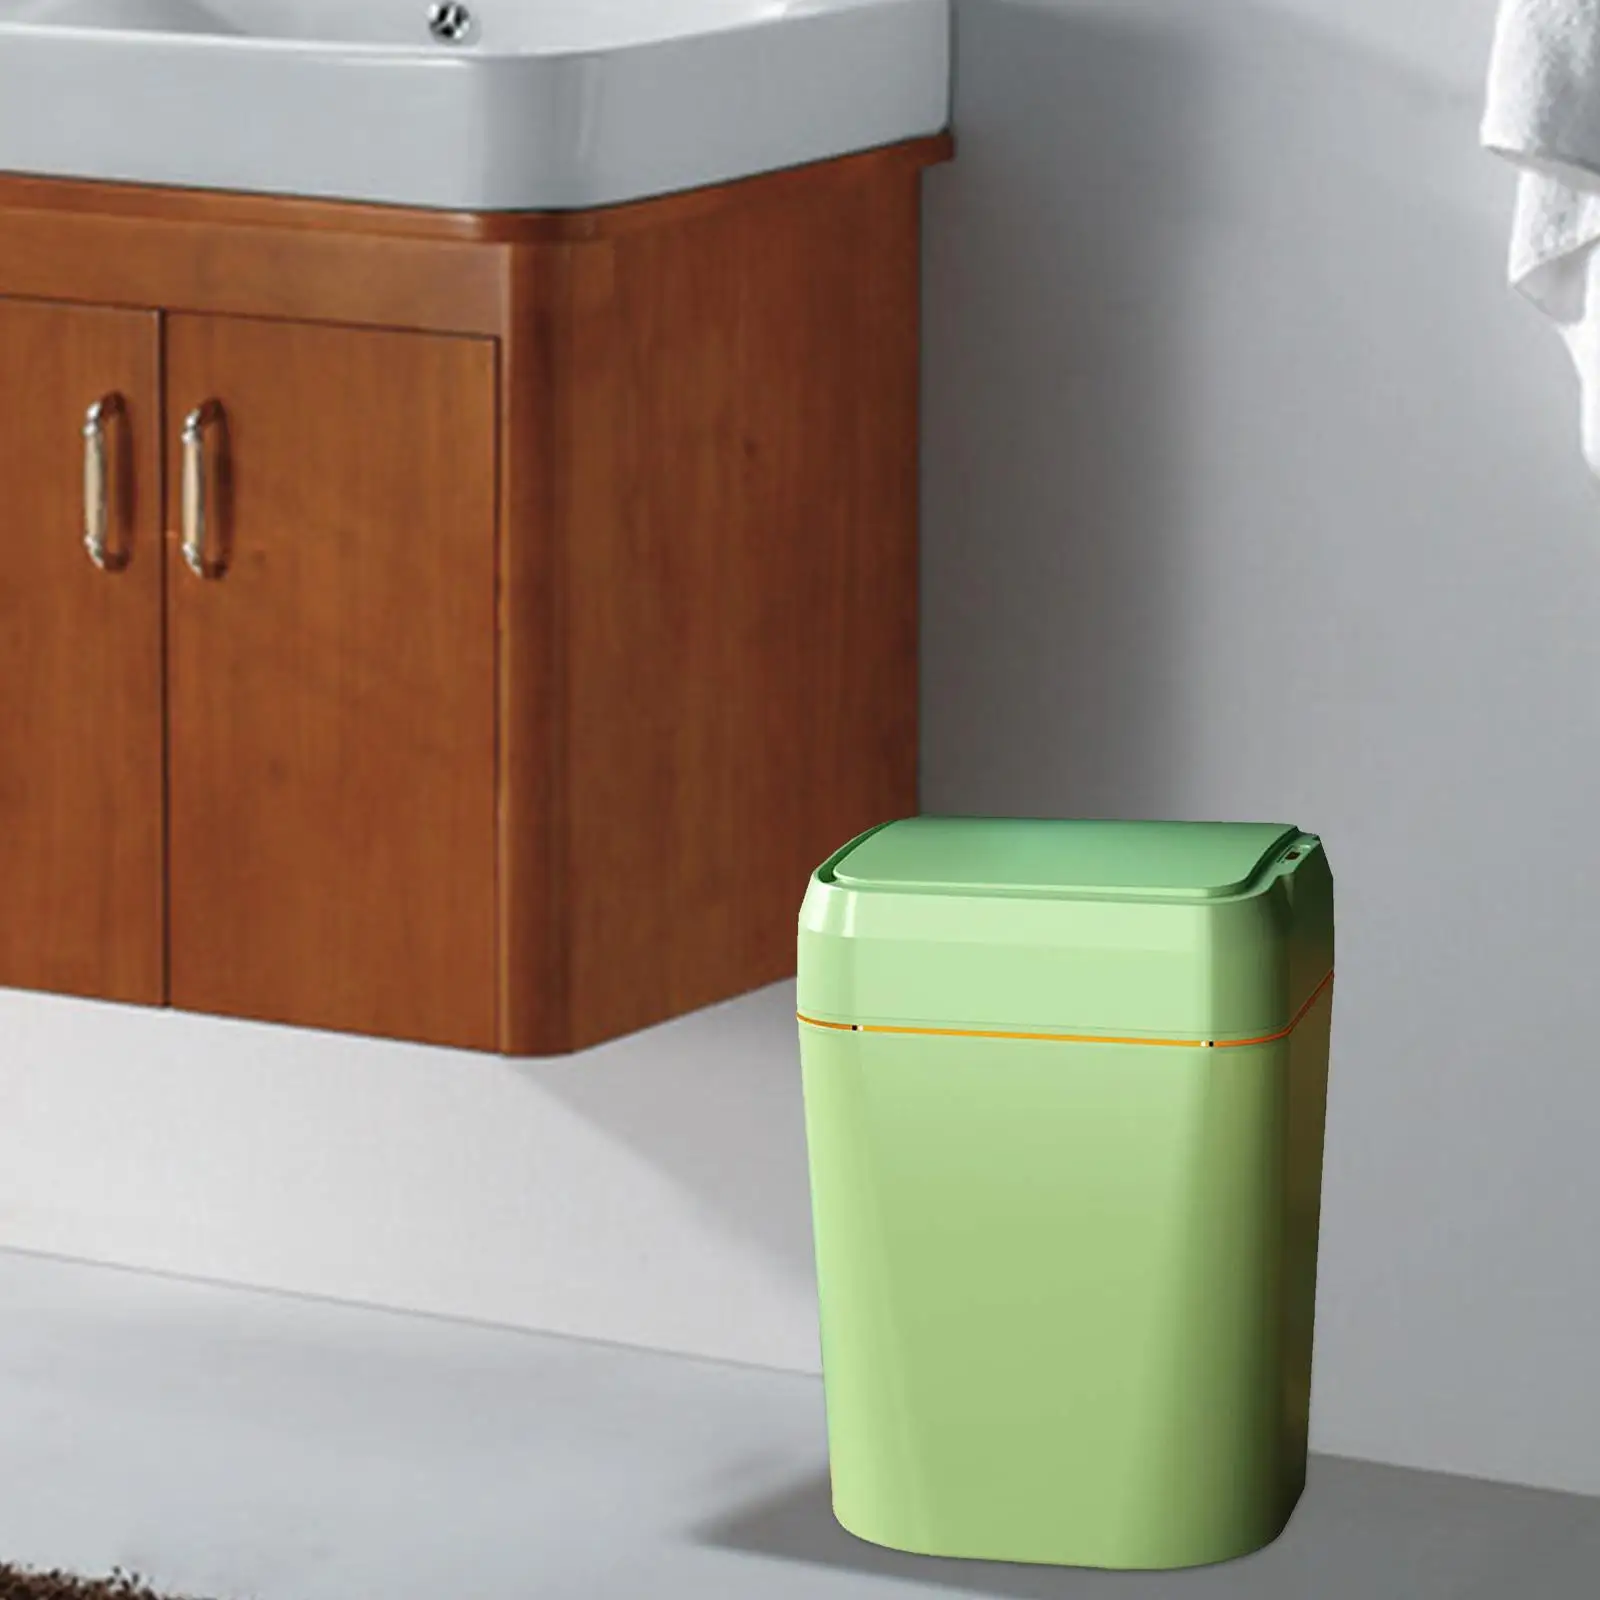 Touchless Trash Can 12L Toilet with Lid Space Saving Rubbish Bin Electric Garbage Bin for Bedroom Corner Bathroom Office